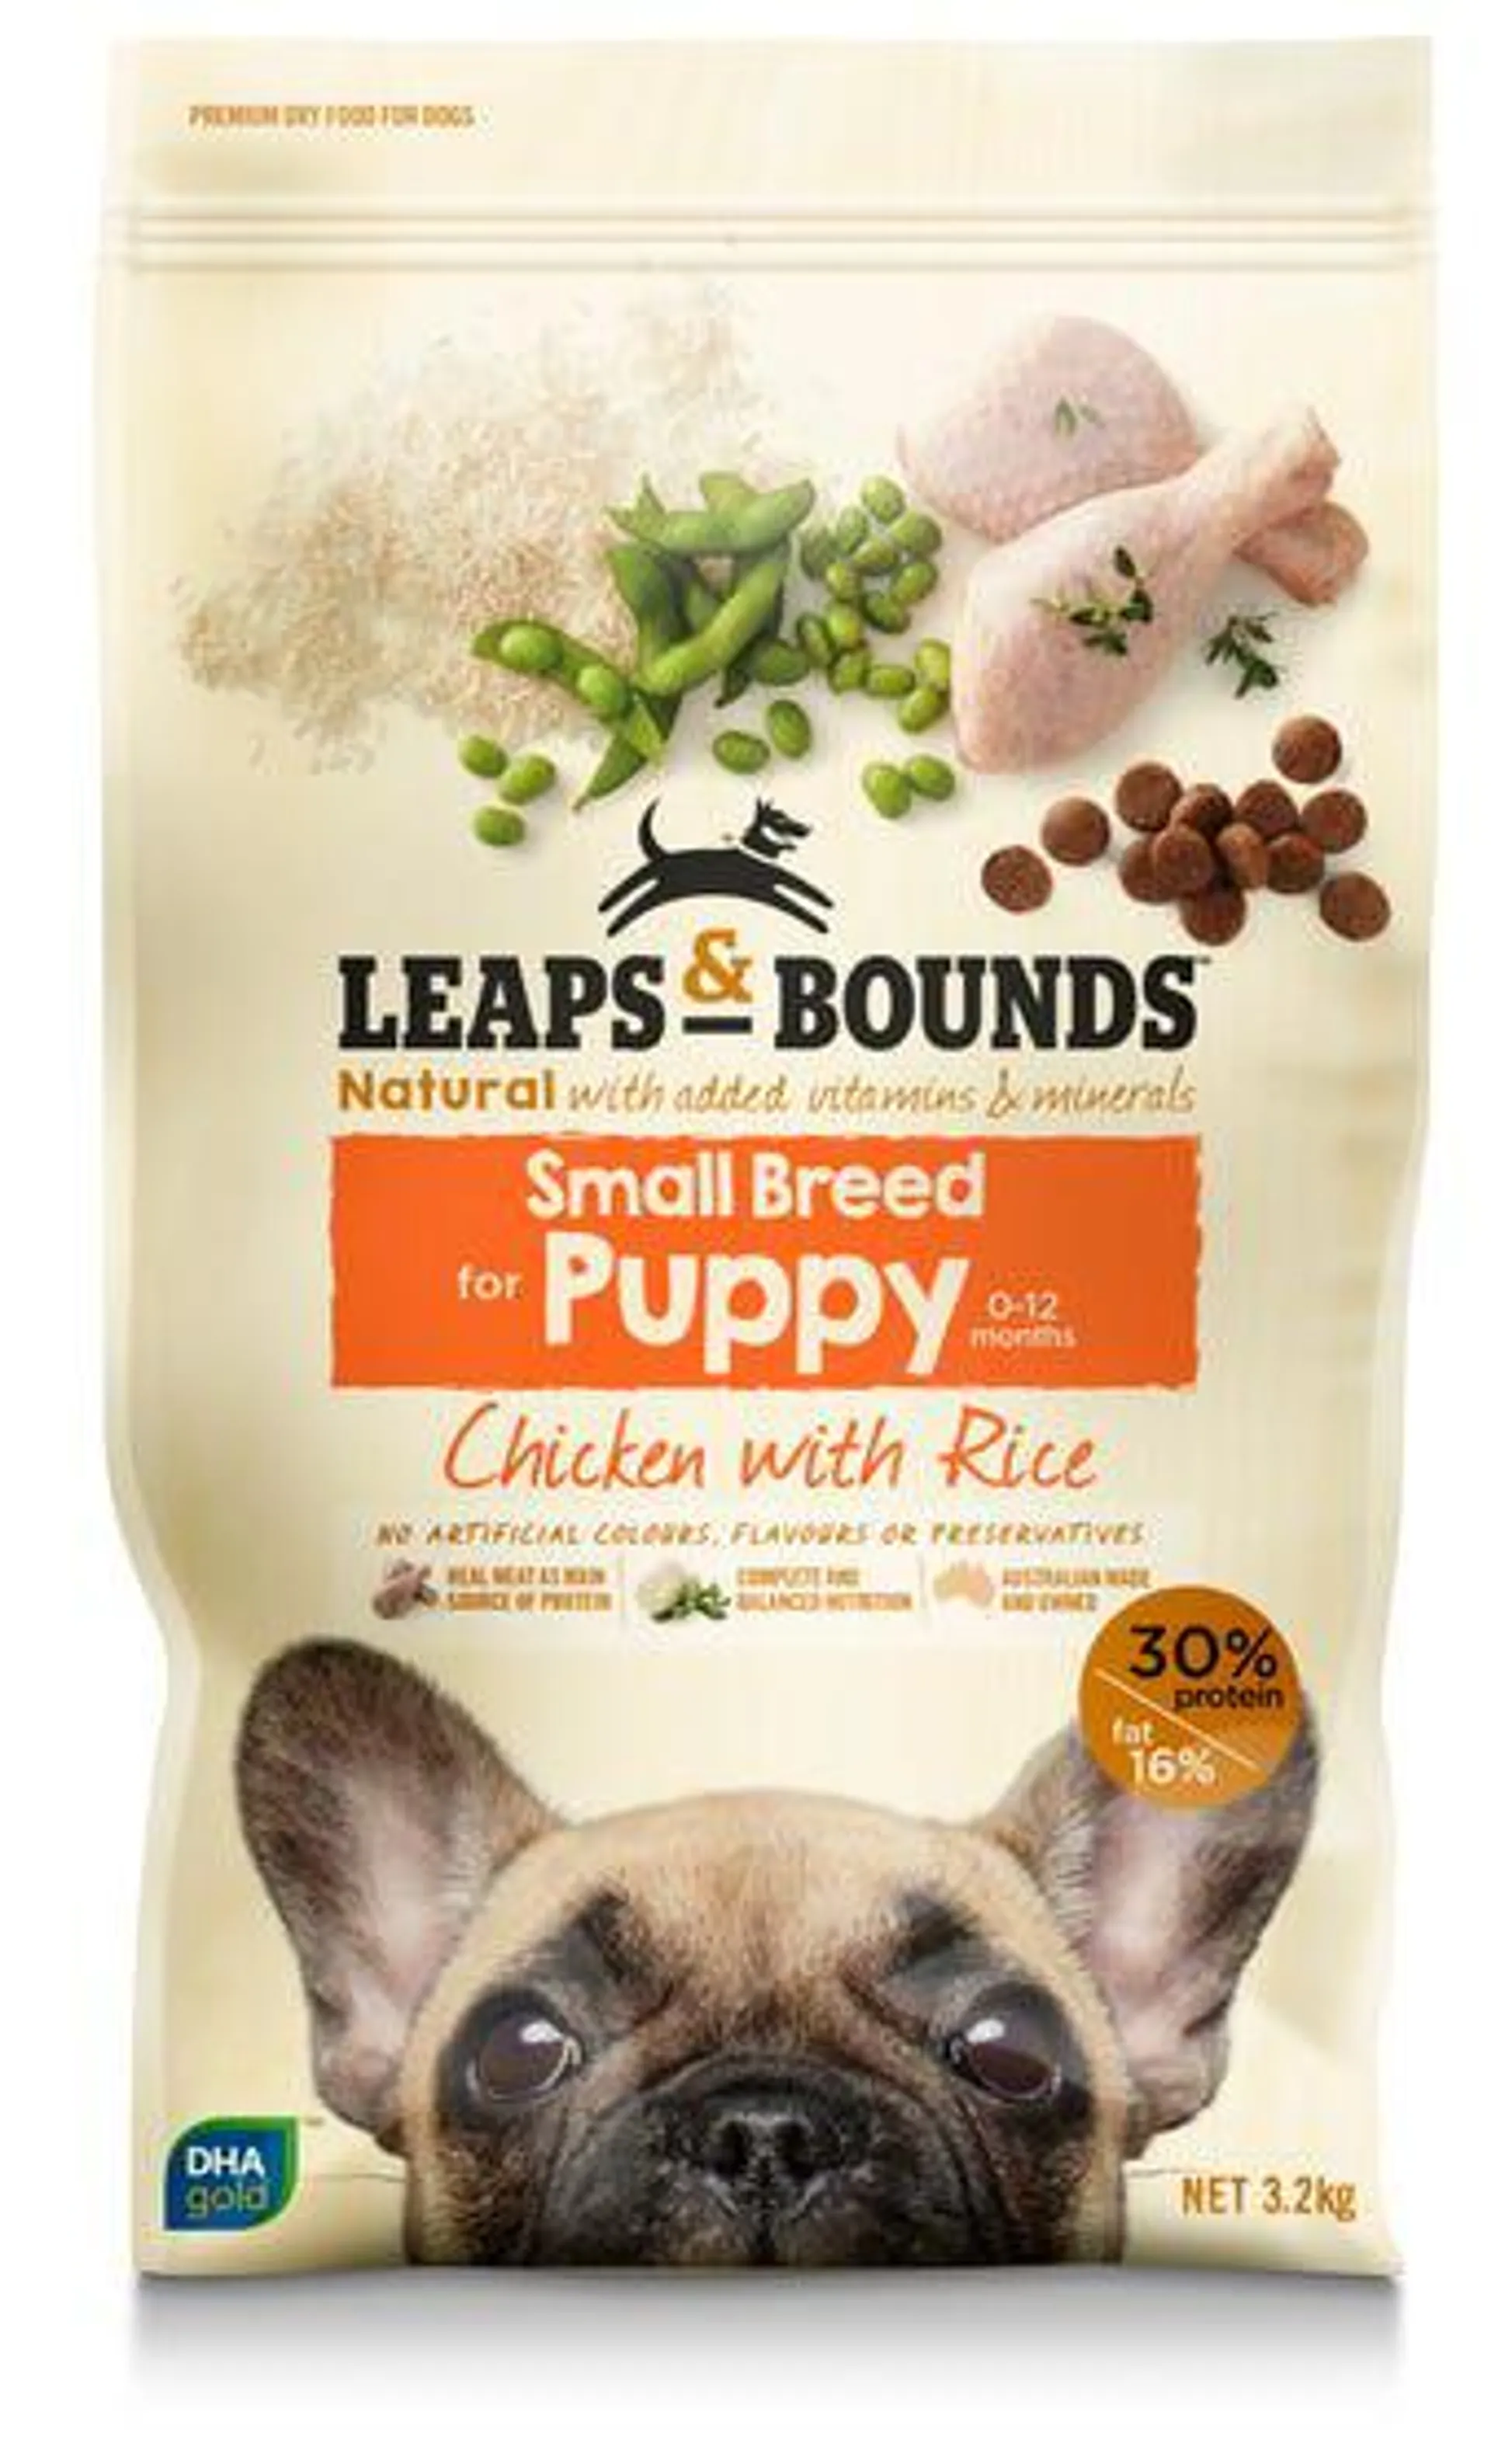 Leaps & Bounds Small Breed Chicken And Rice Puppy Food 3.2kg